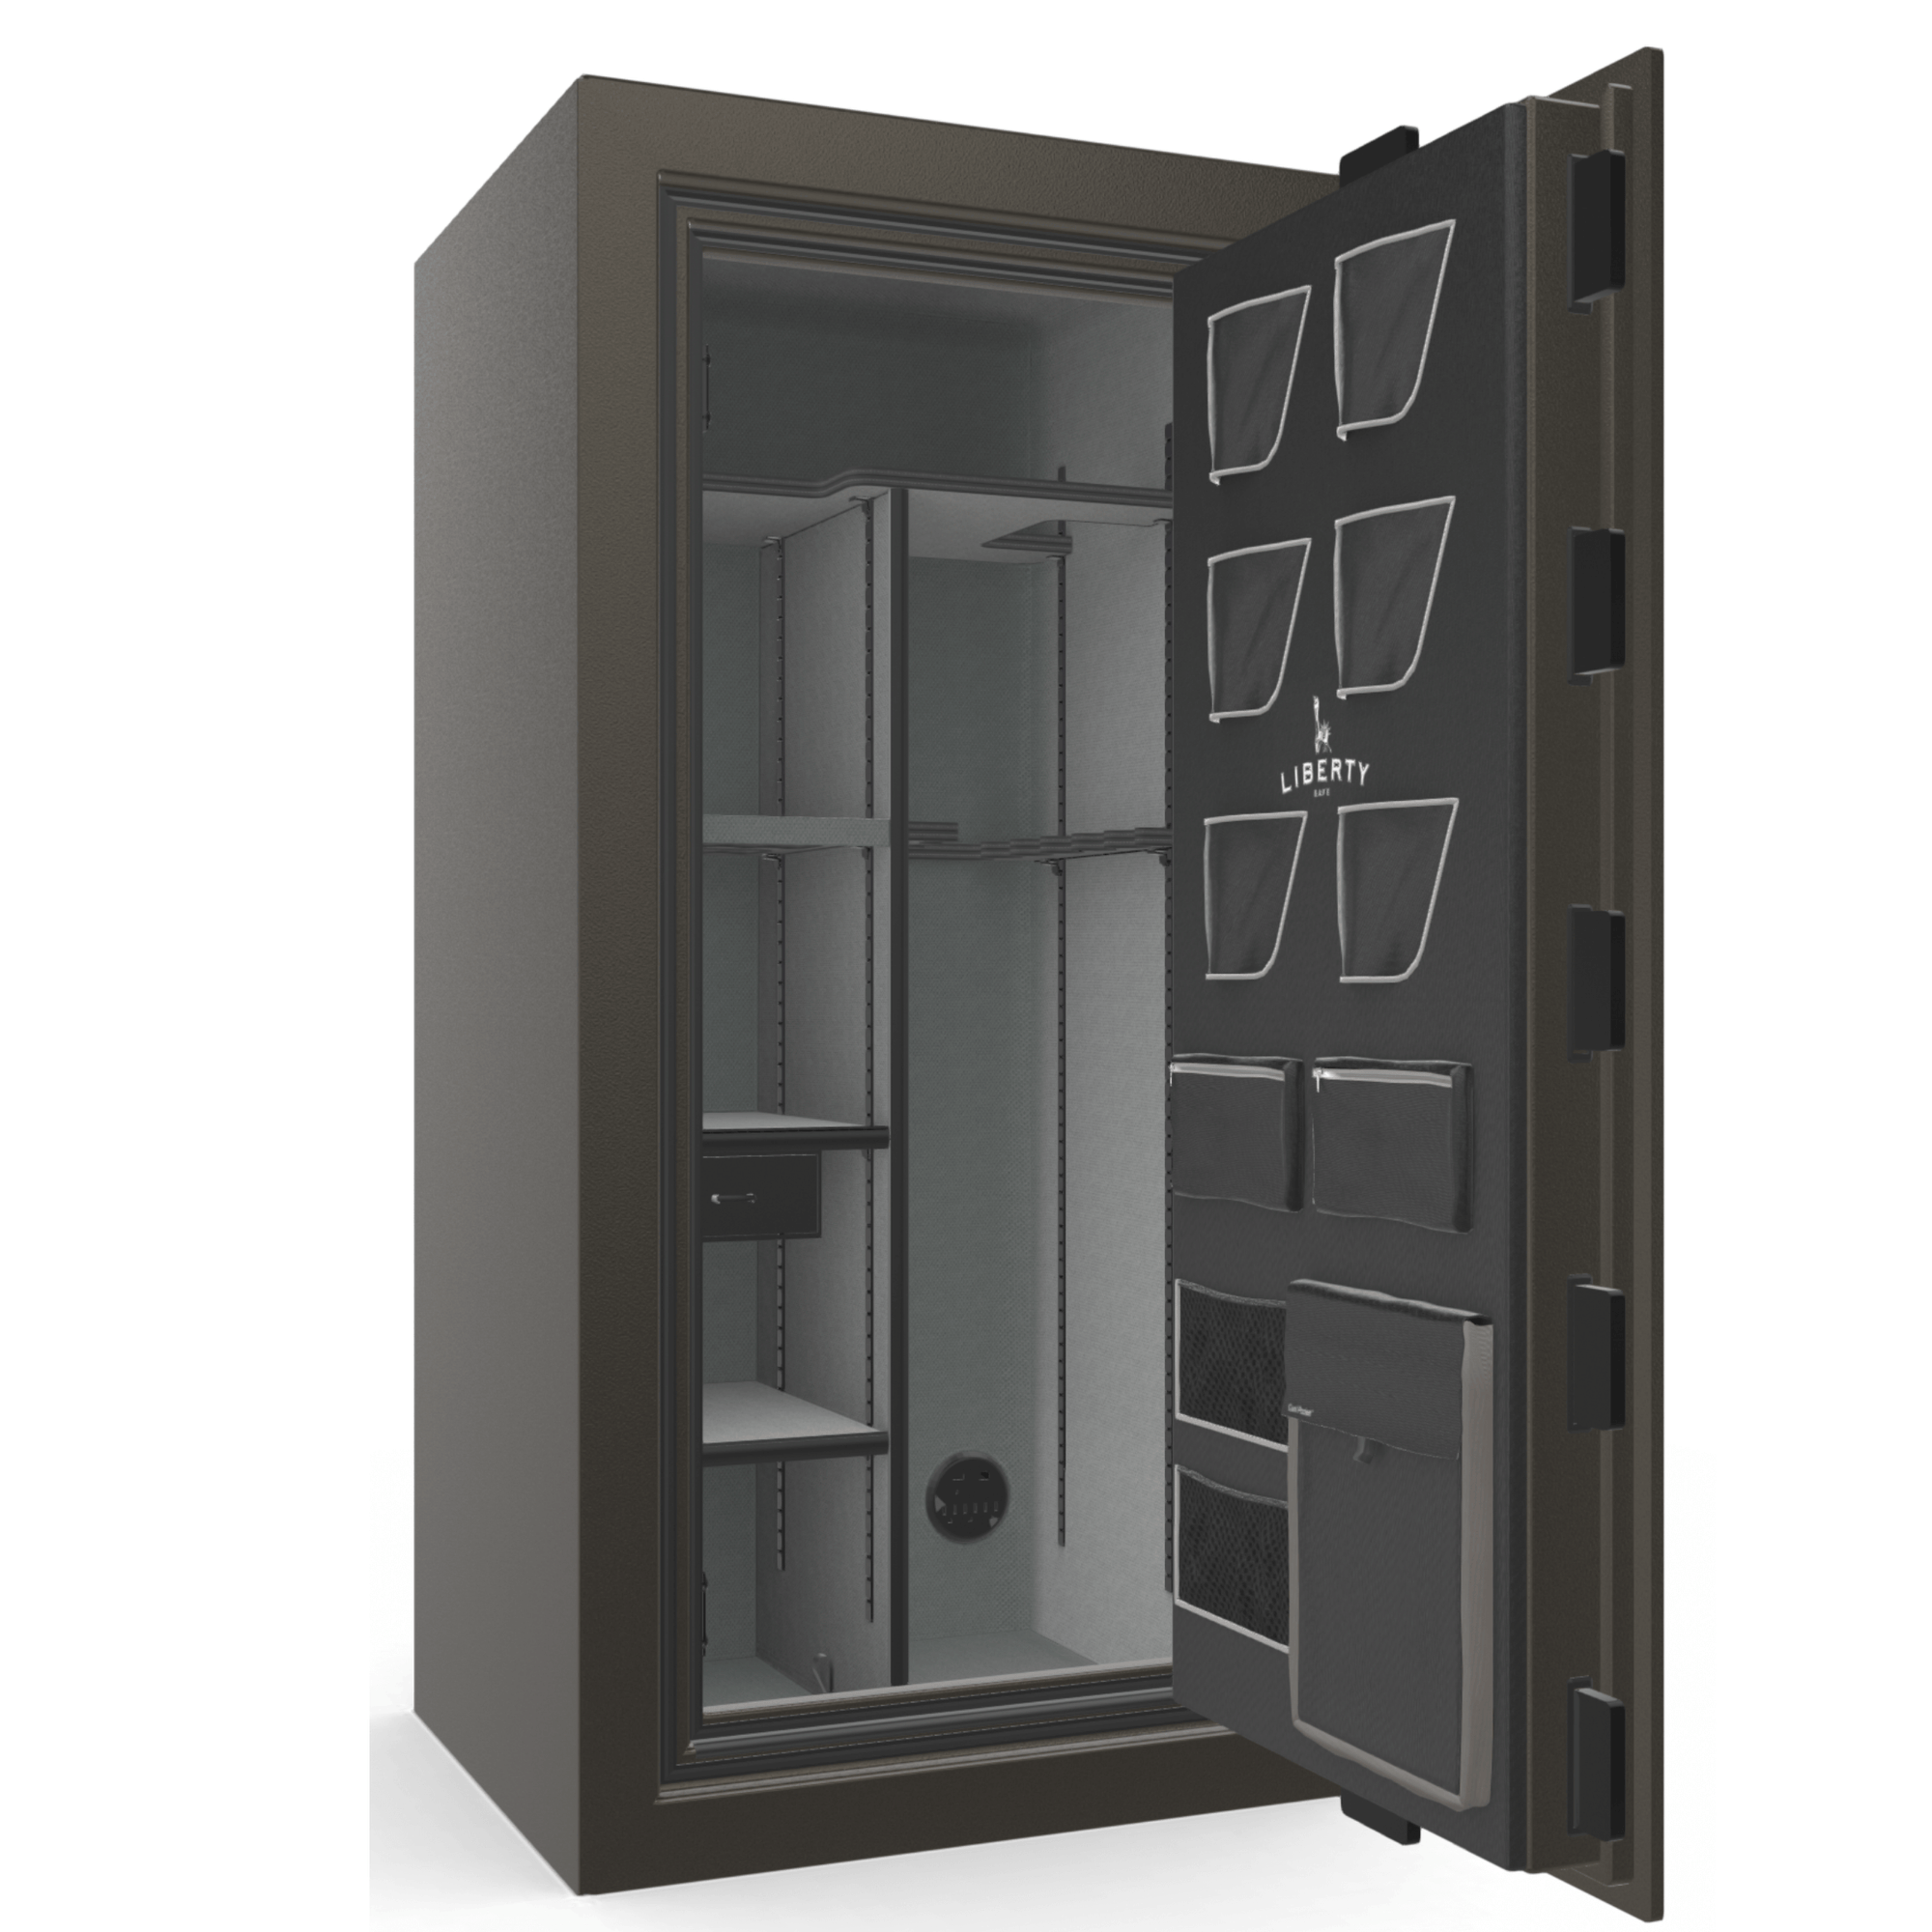 Classic Plus Series | Level 7 Security | 110 Minute Fire Protection | 25 | DIMENSIONS: 60.5"(H) X 30"(W) X 28.5"(D) | Gray Marble | Mechanical Lock